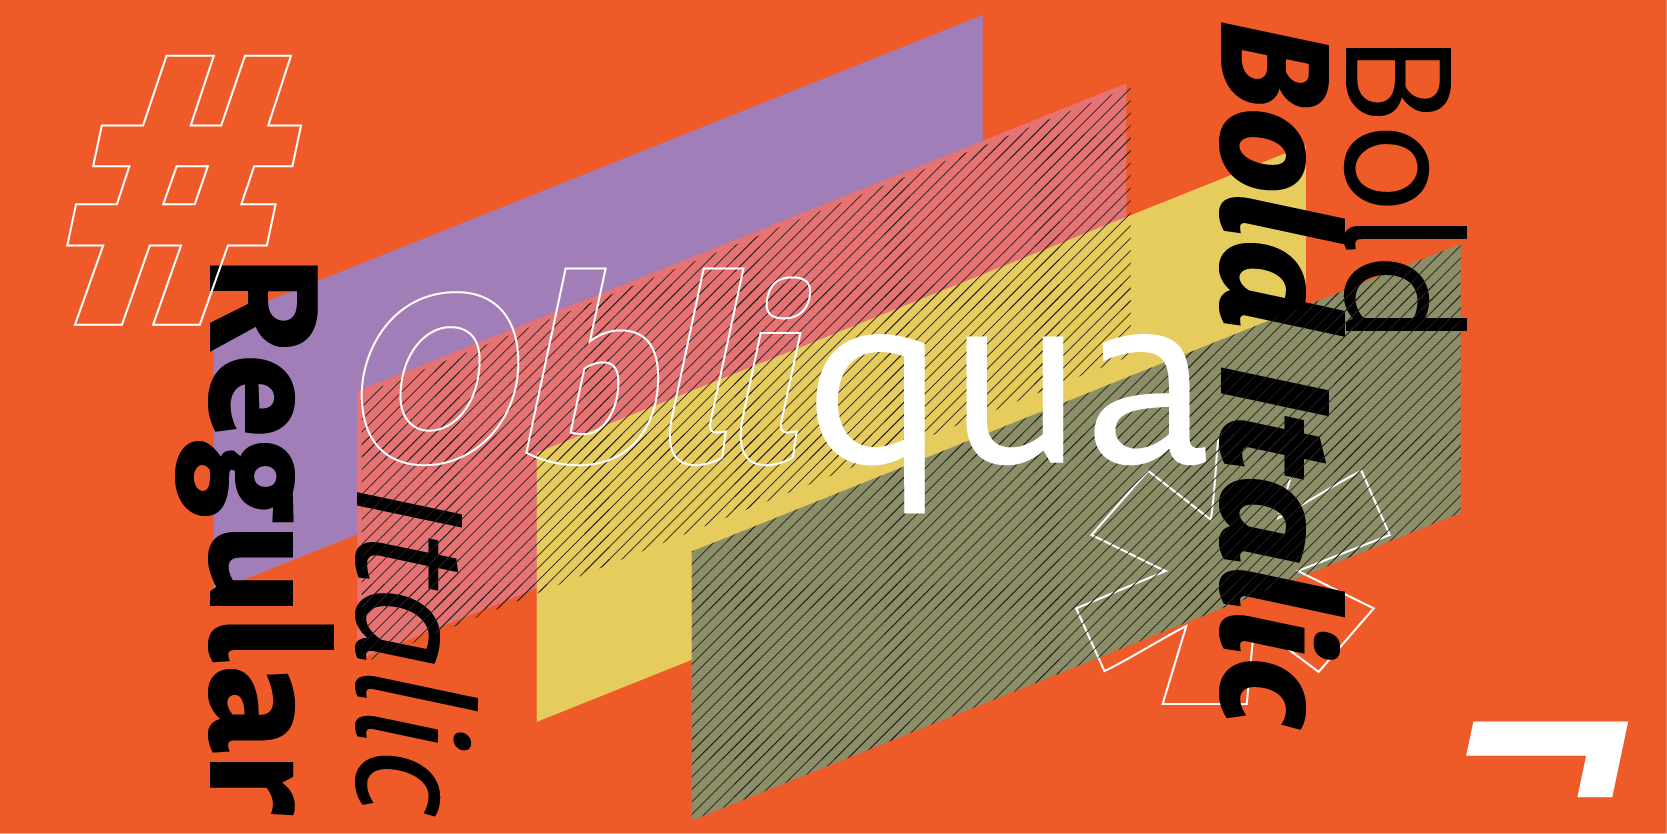 Card displaying Obliqua Sans typeface in various styles